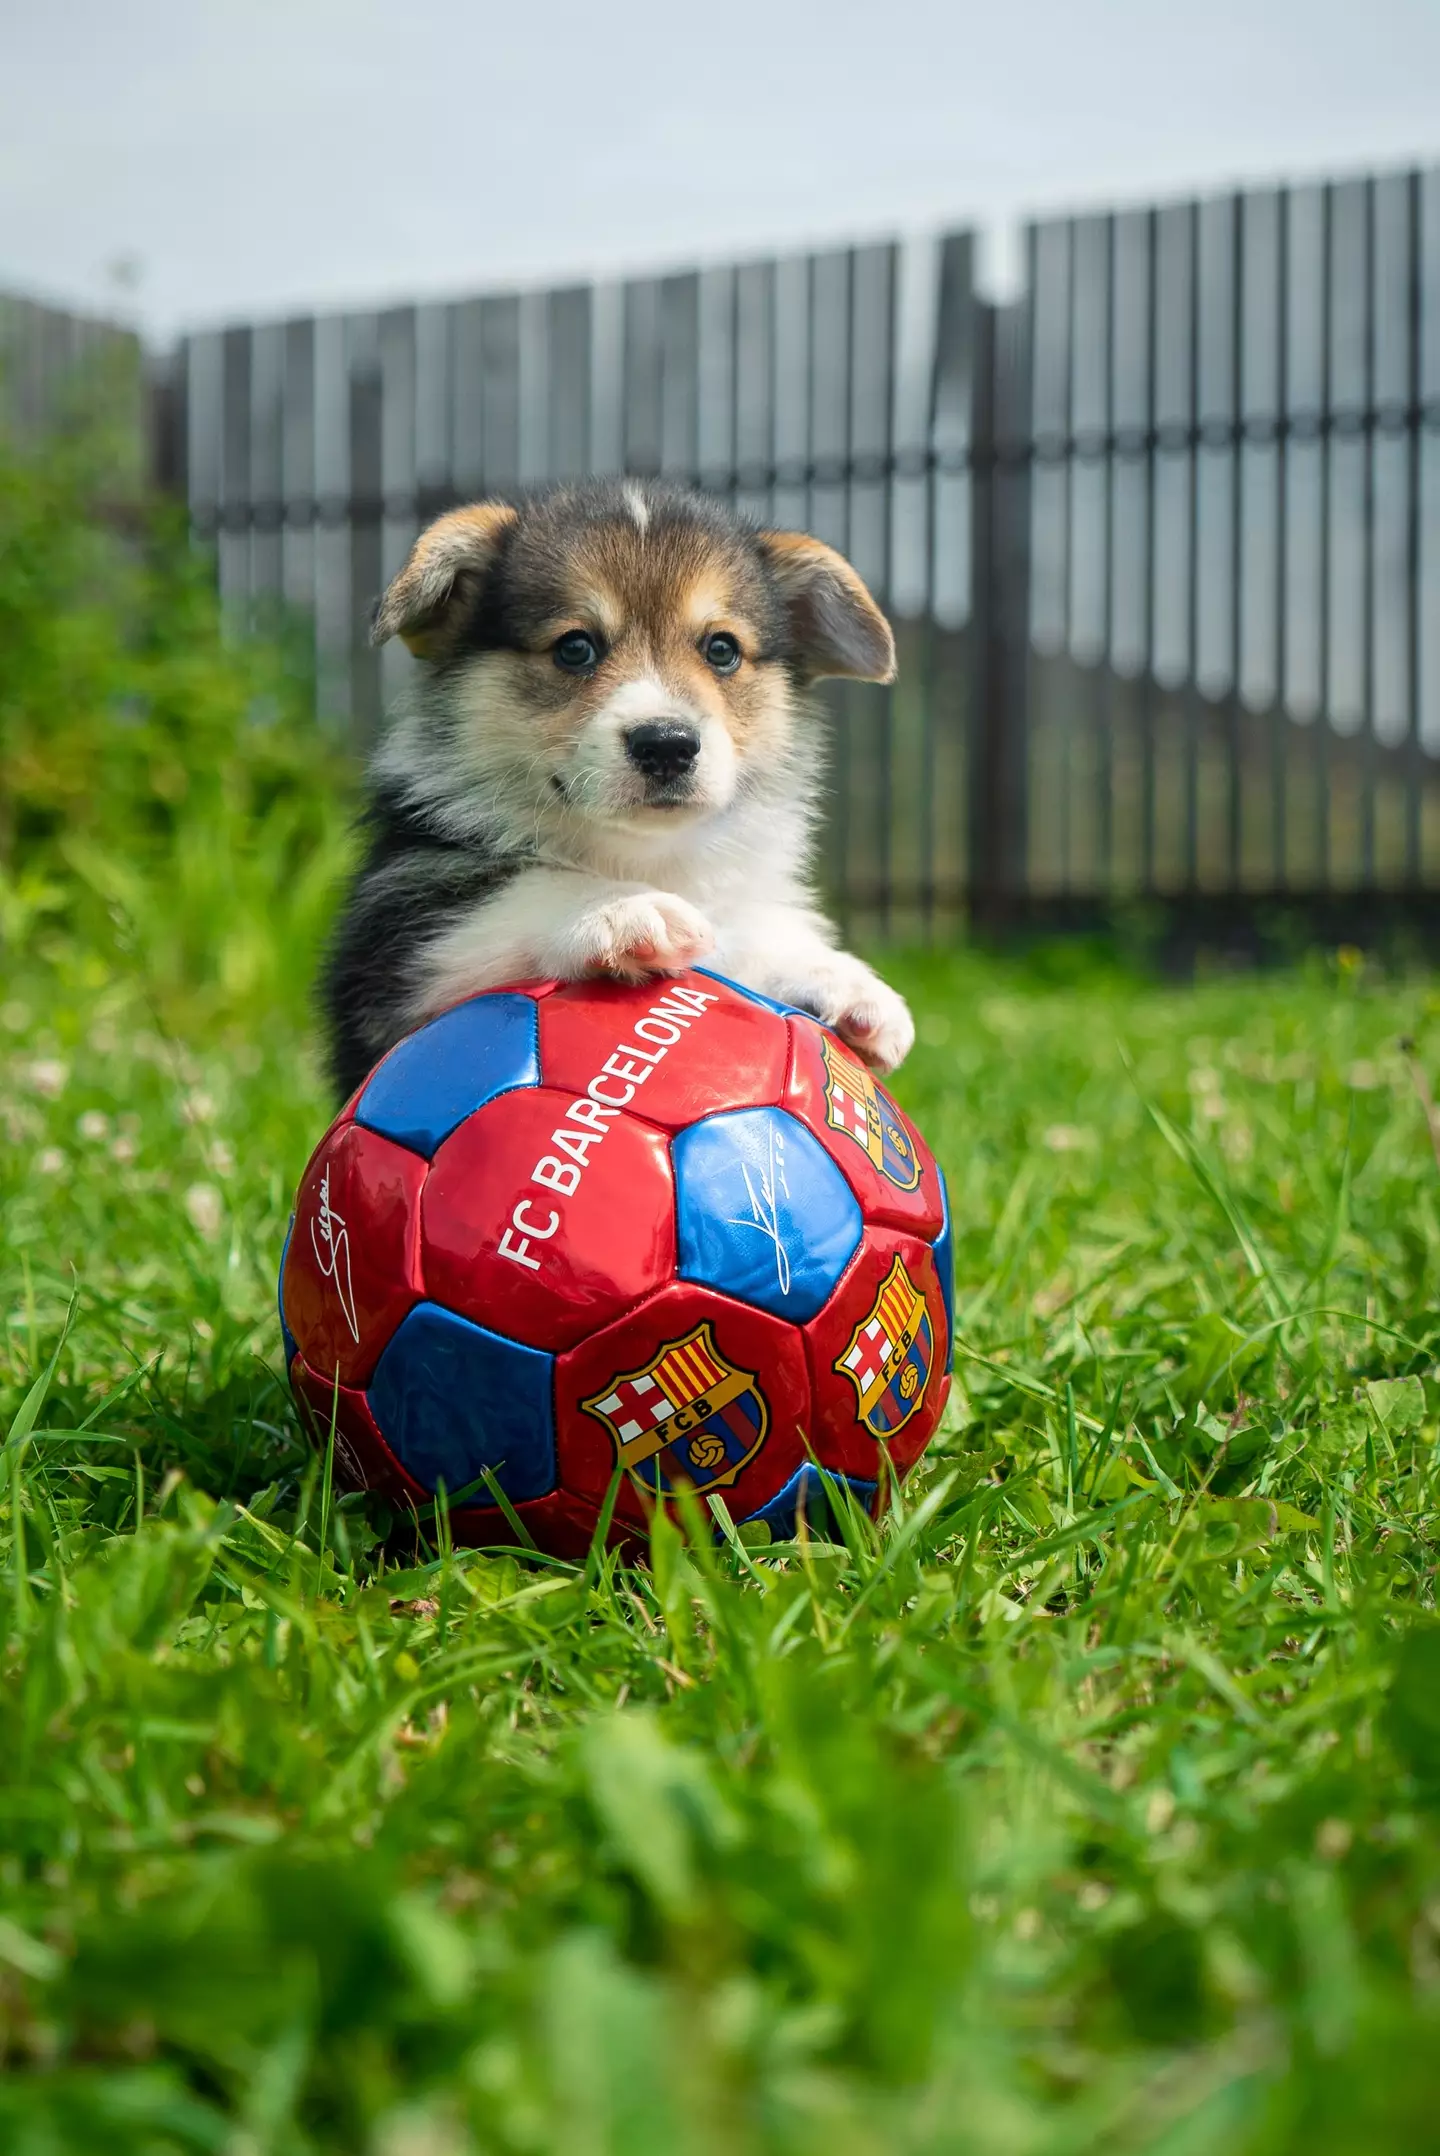 If your dog does want to play with a ball, it's important that you choose a ball of a safe size which they can't choke on (Unsplash Egor Vikhrev).